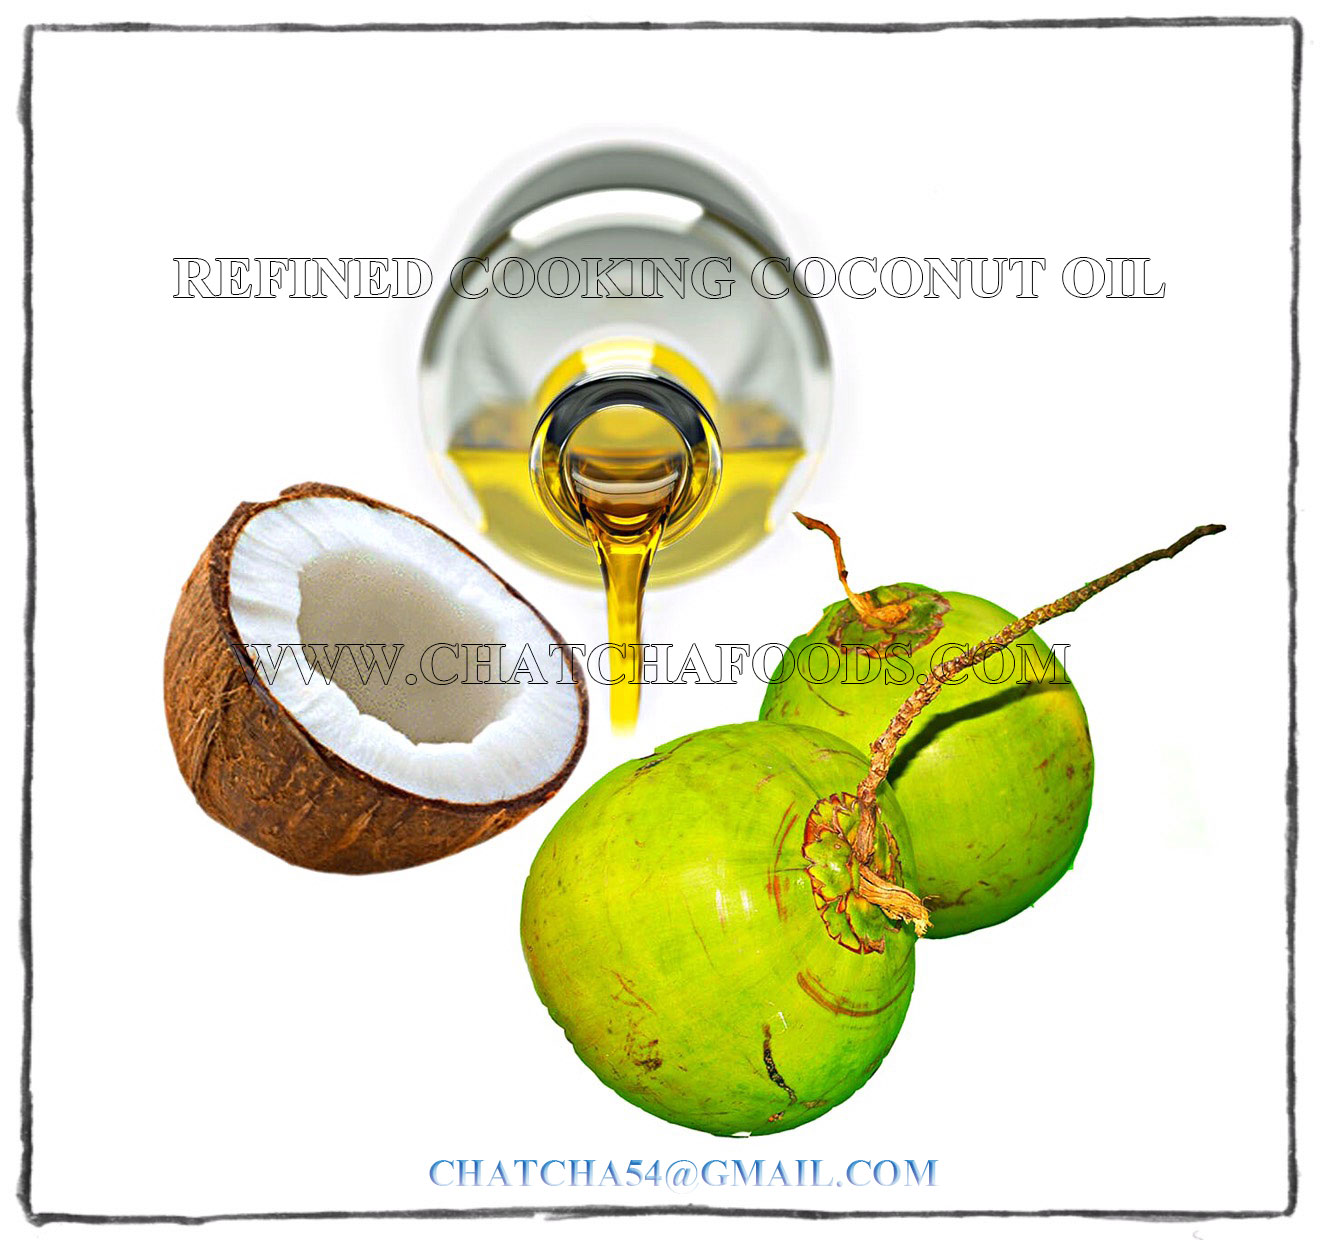 Cooking coconut oil refined